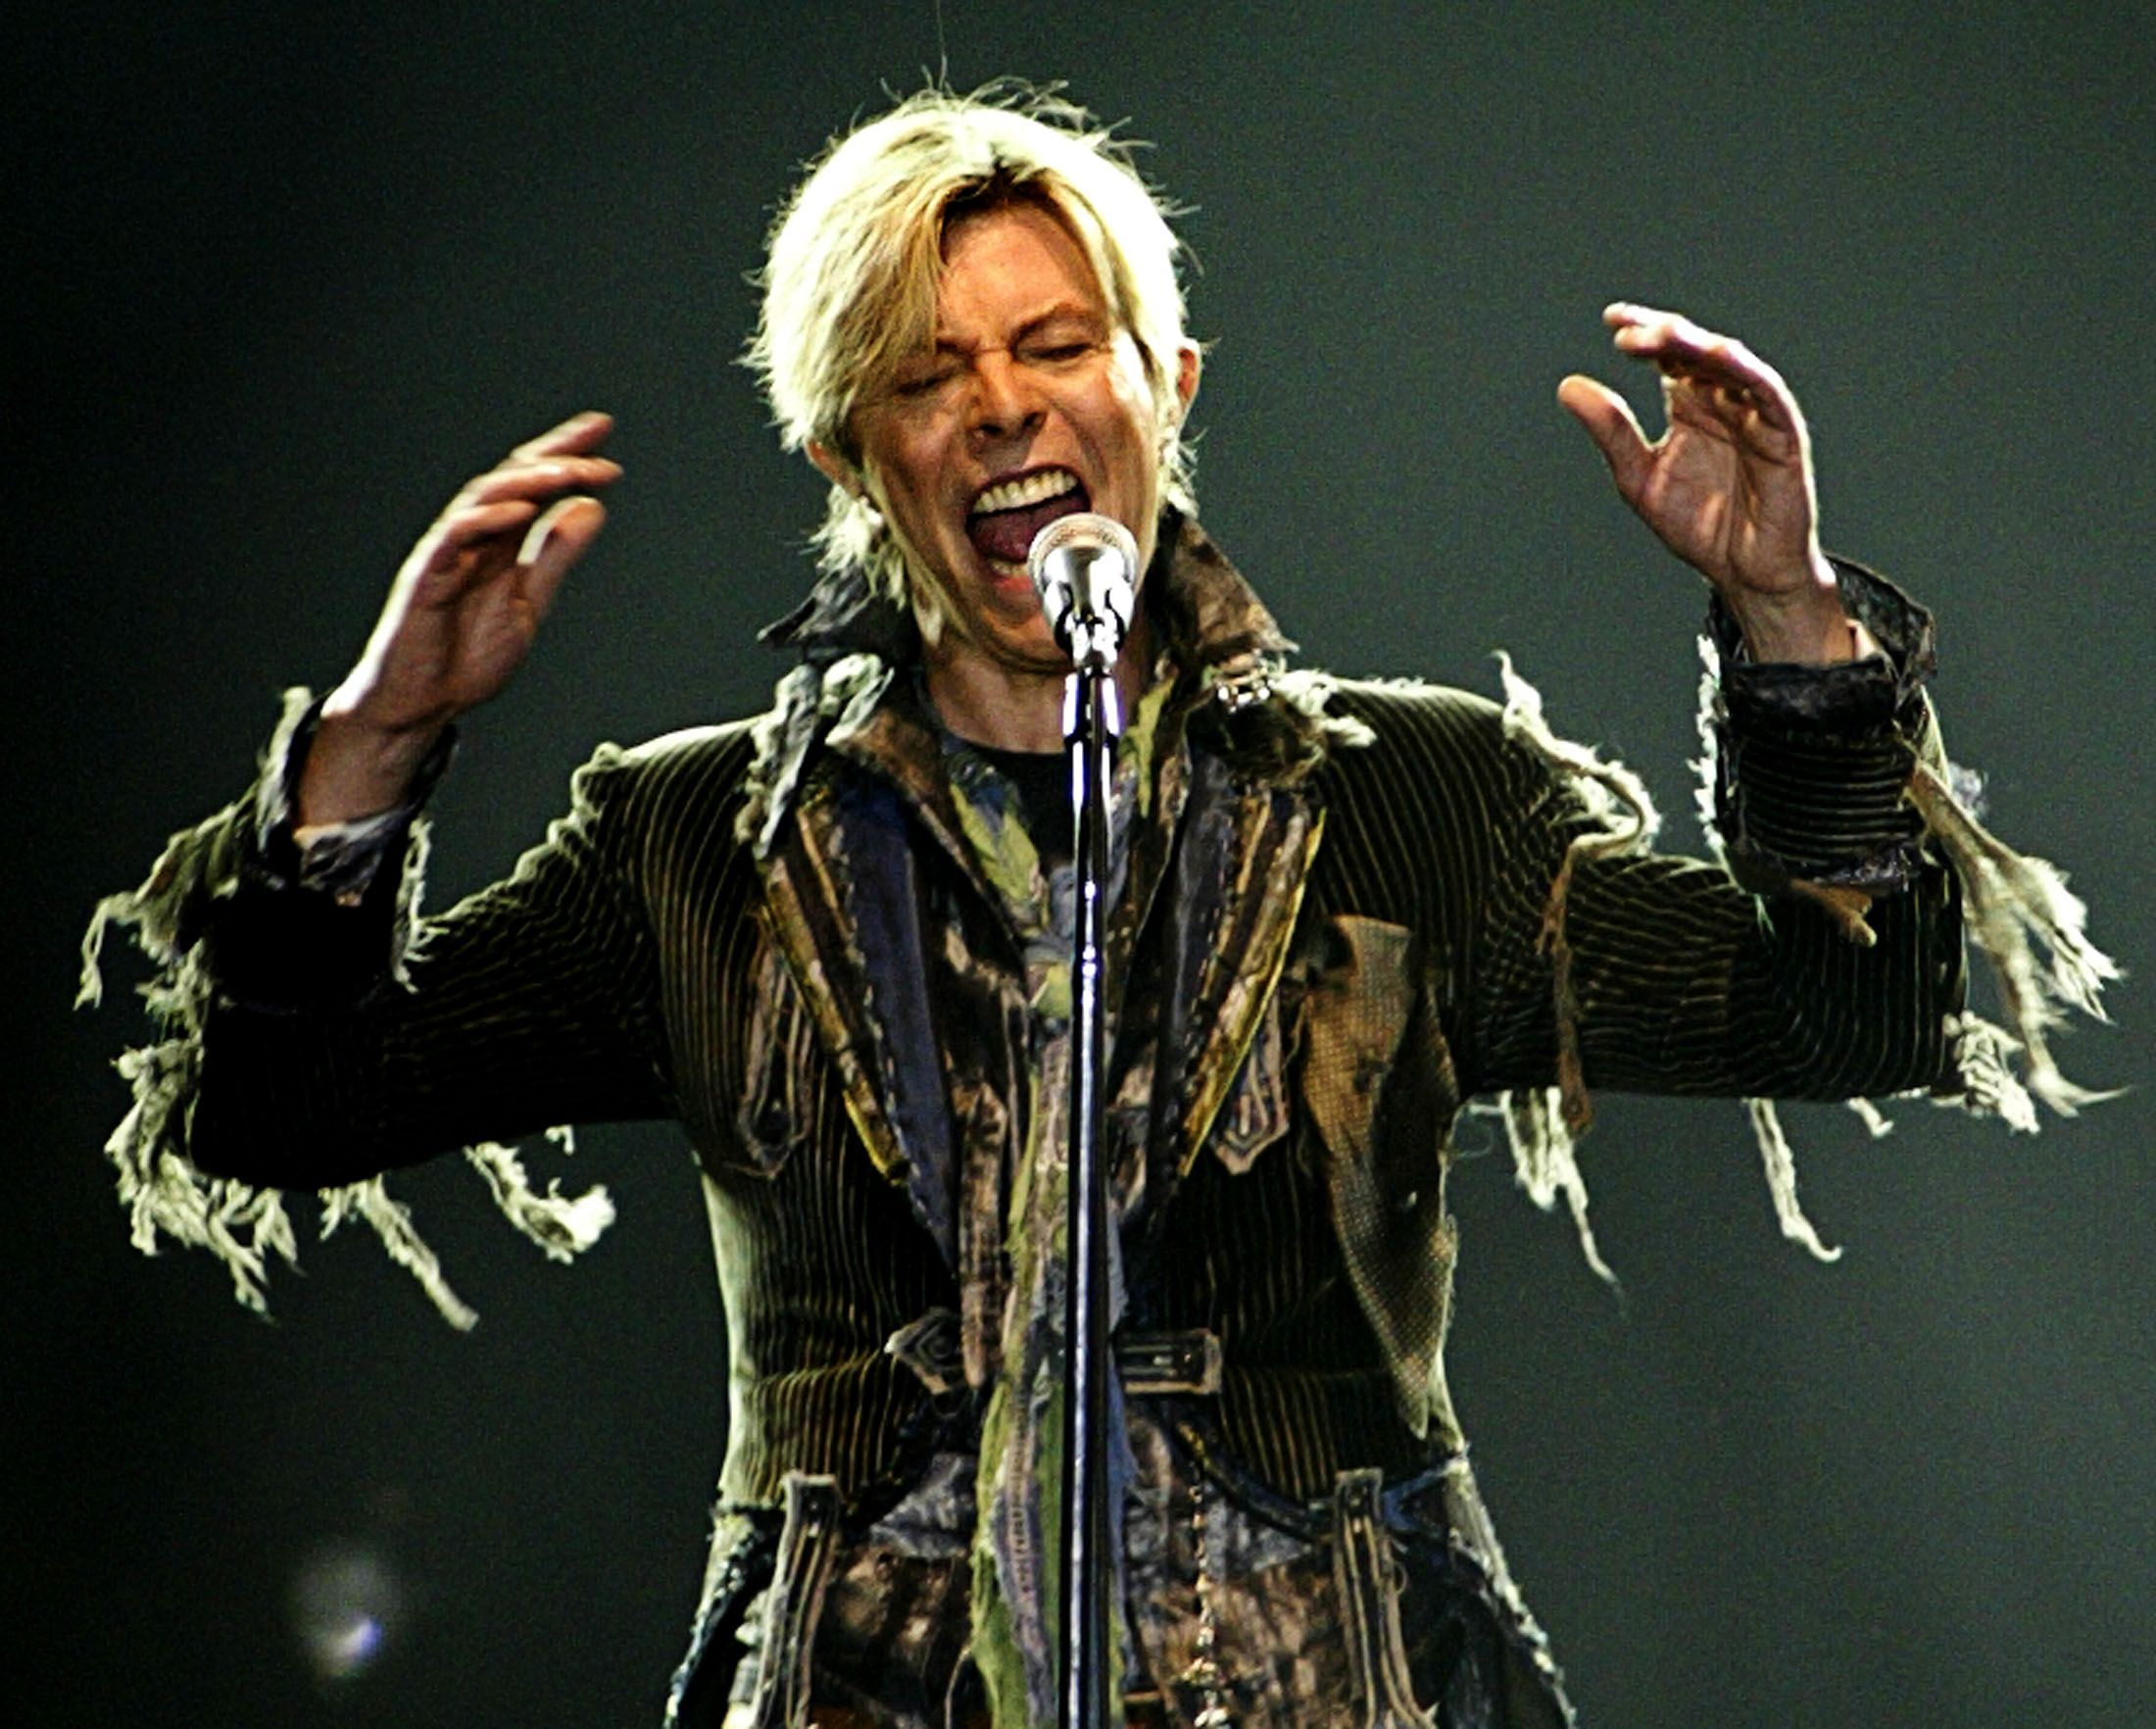 British singer David Bowie performs in a concert during his worldwide tour called A Reality Tour at T-mobile arena in Prague